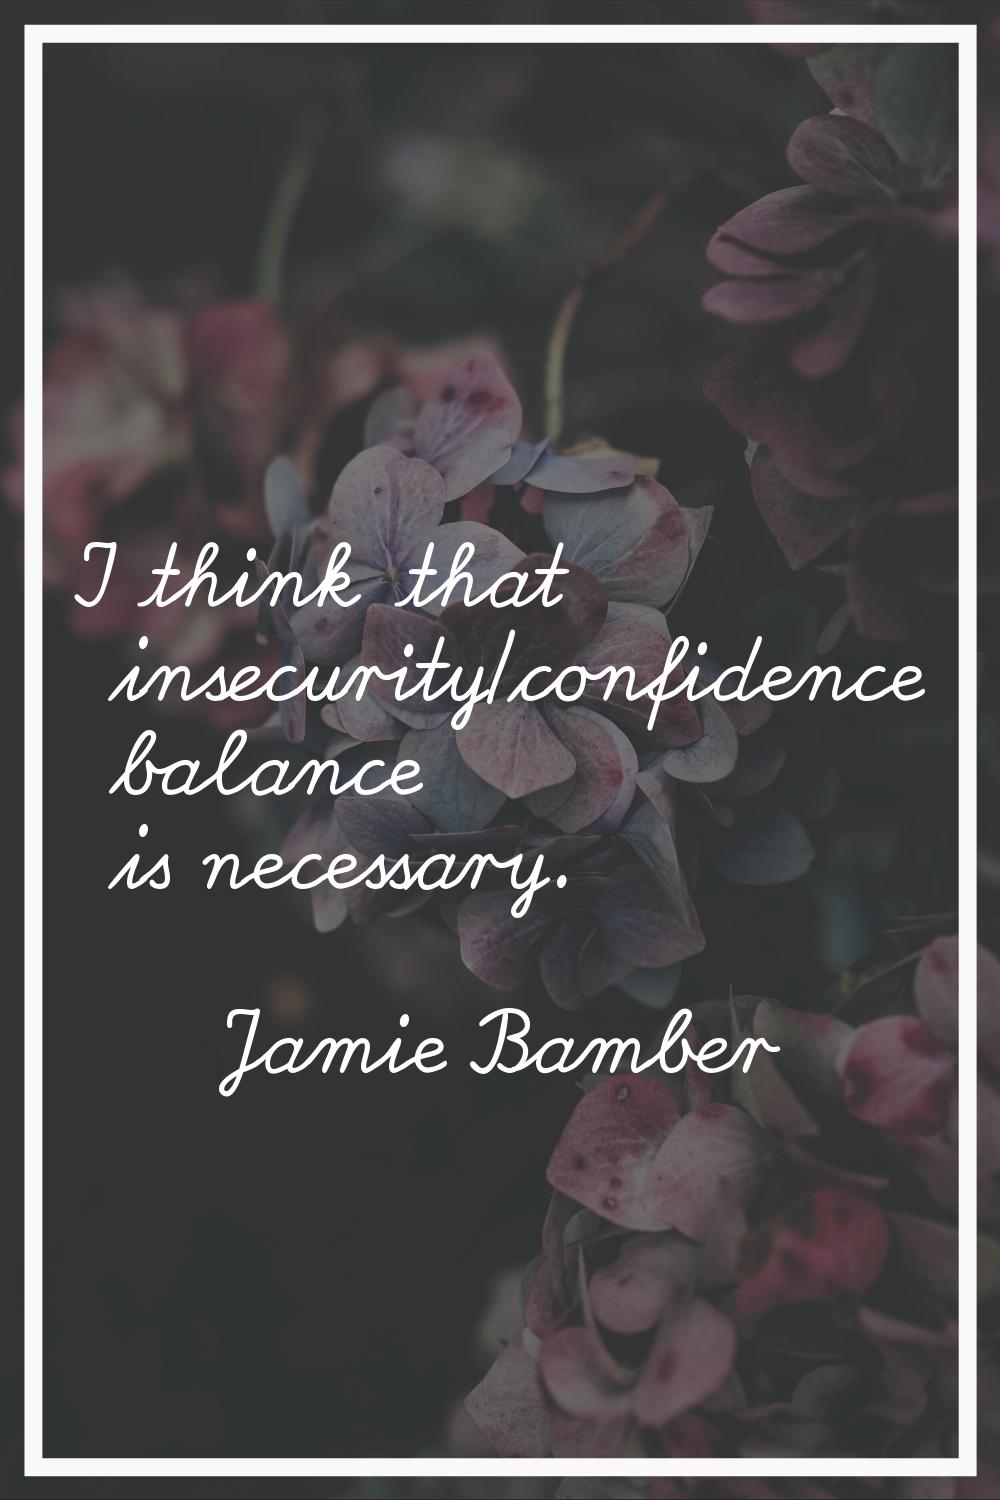 I think that insecurity/confidence balance is necessary.